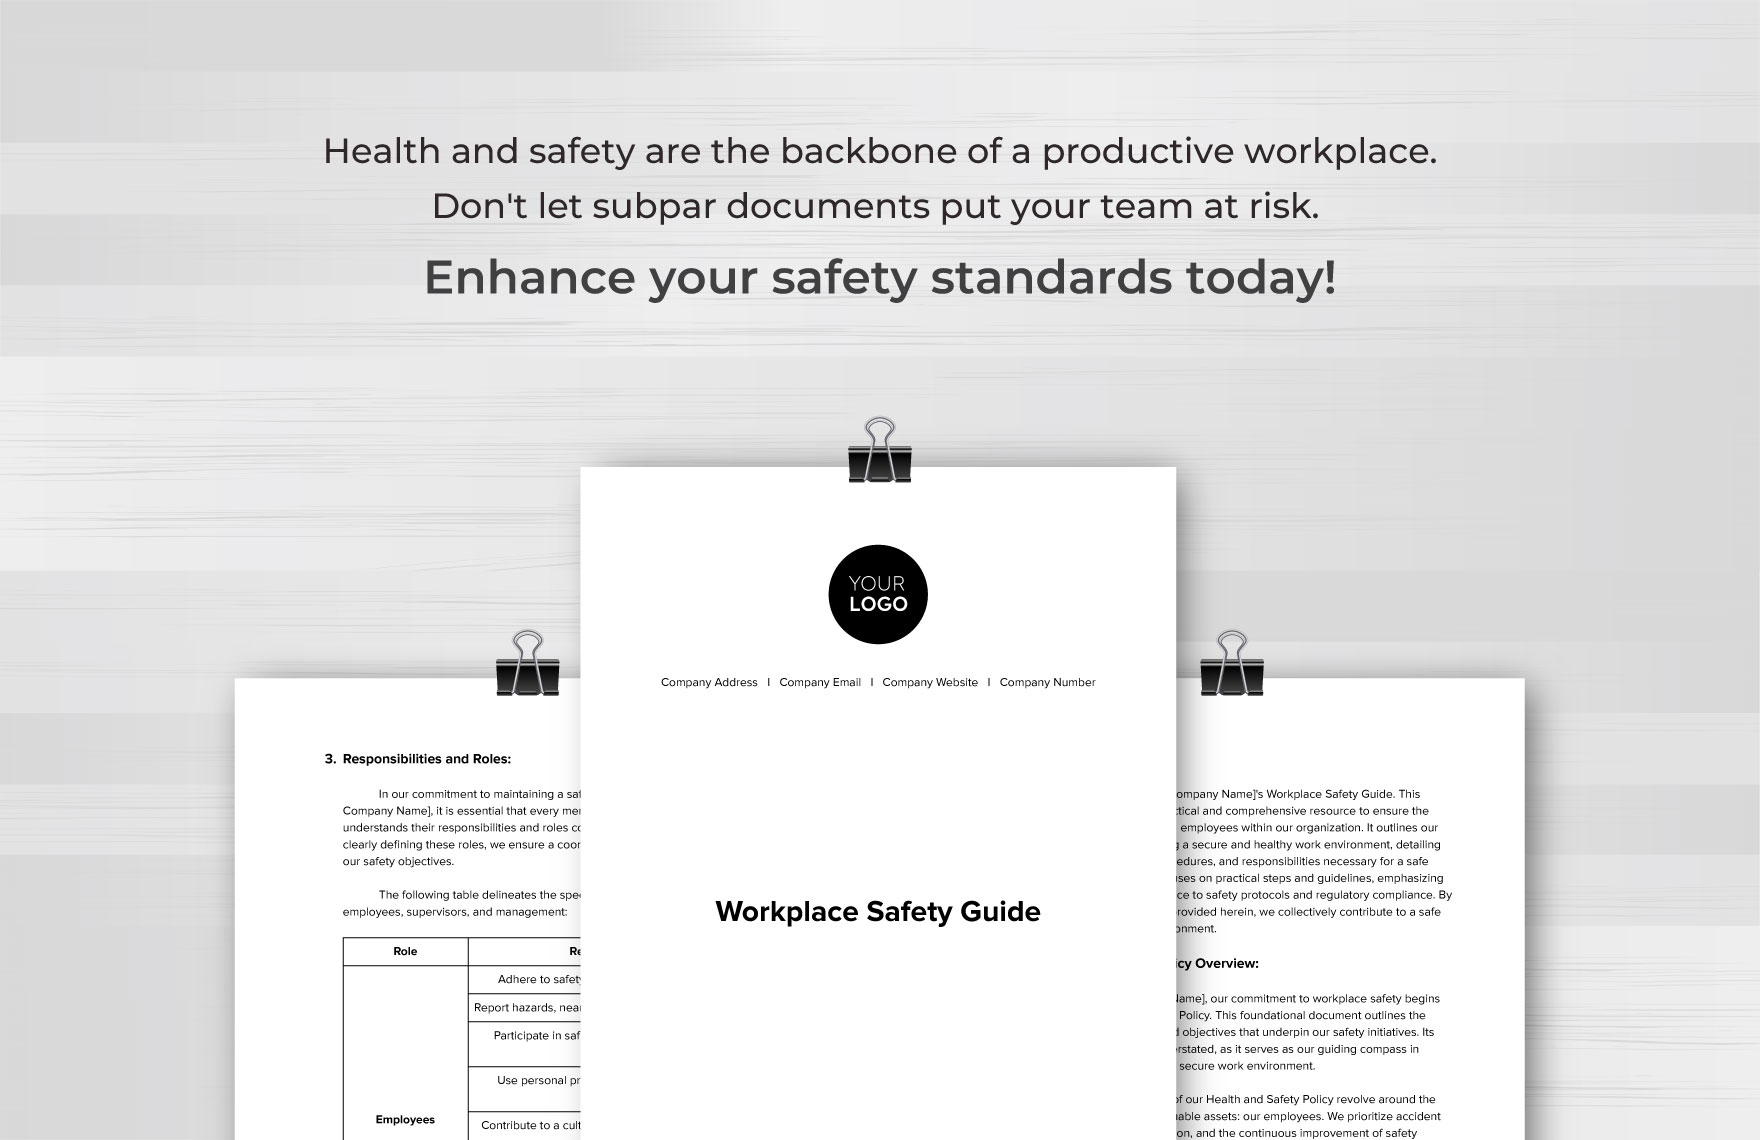 Workplace Safety Guide Template